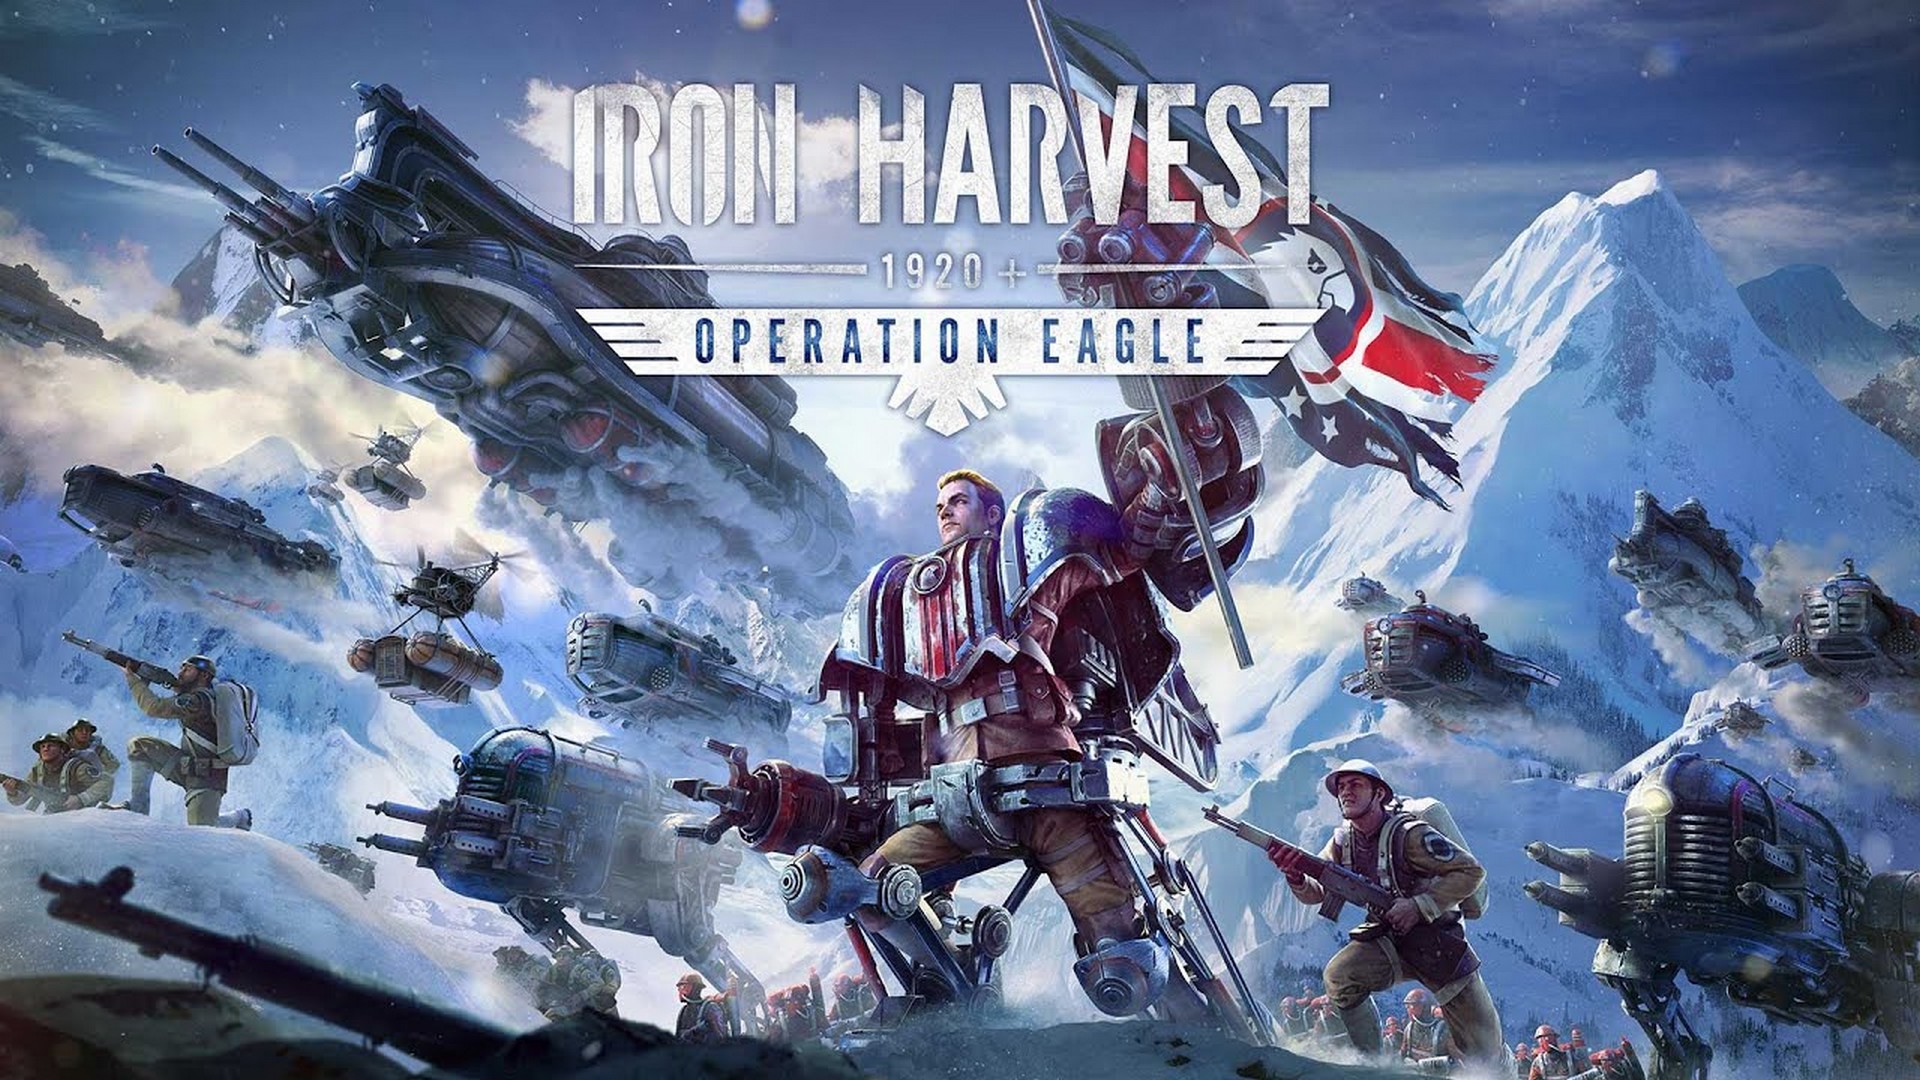 KING Art Games Are Happy To Release “Operation Eagle” The First Iron Harvest 1920+ Add-on